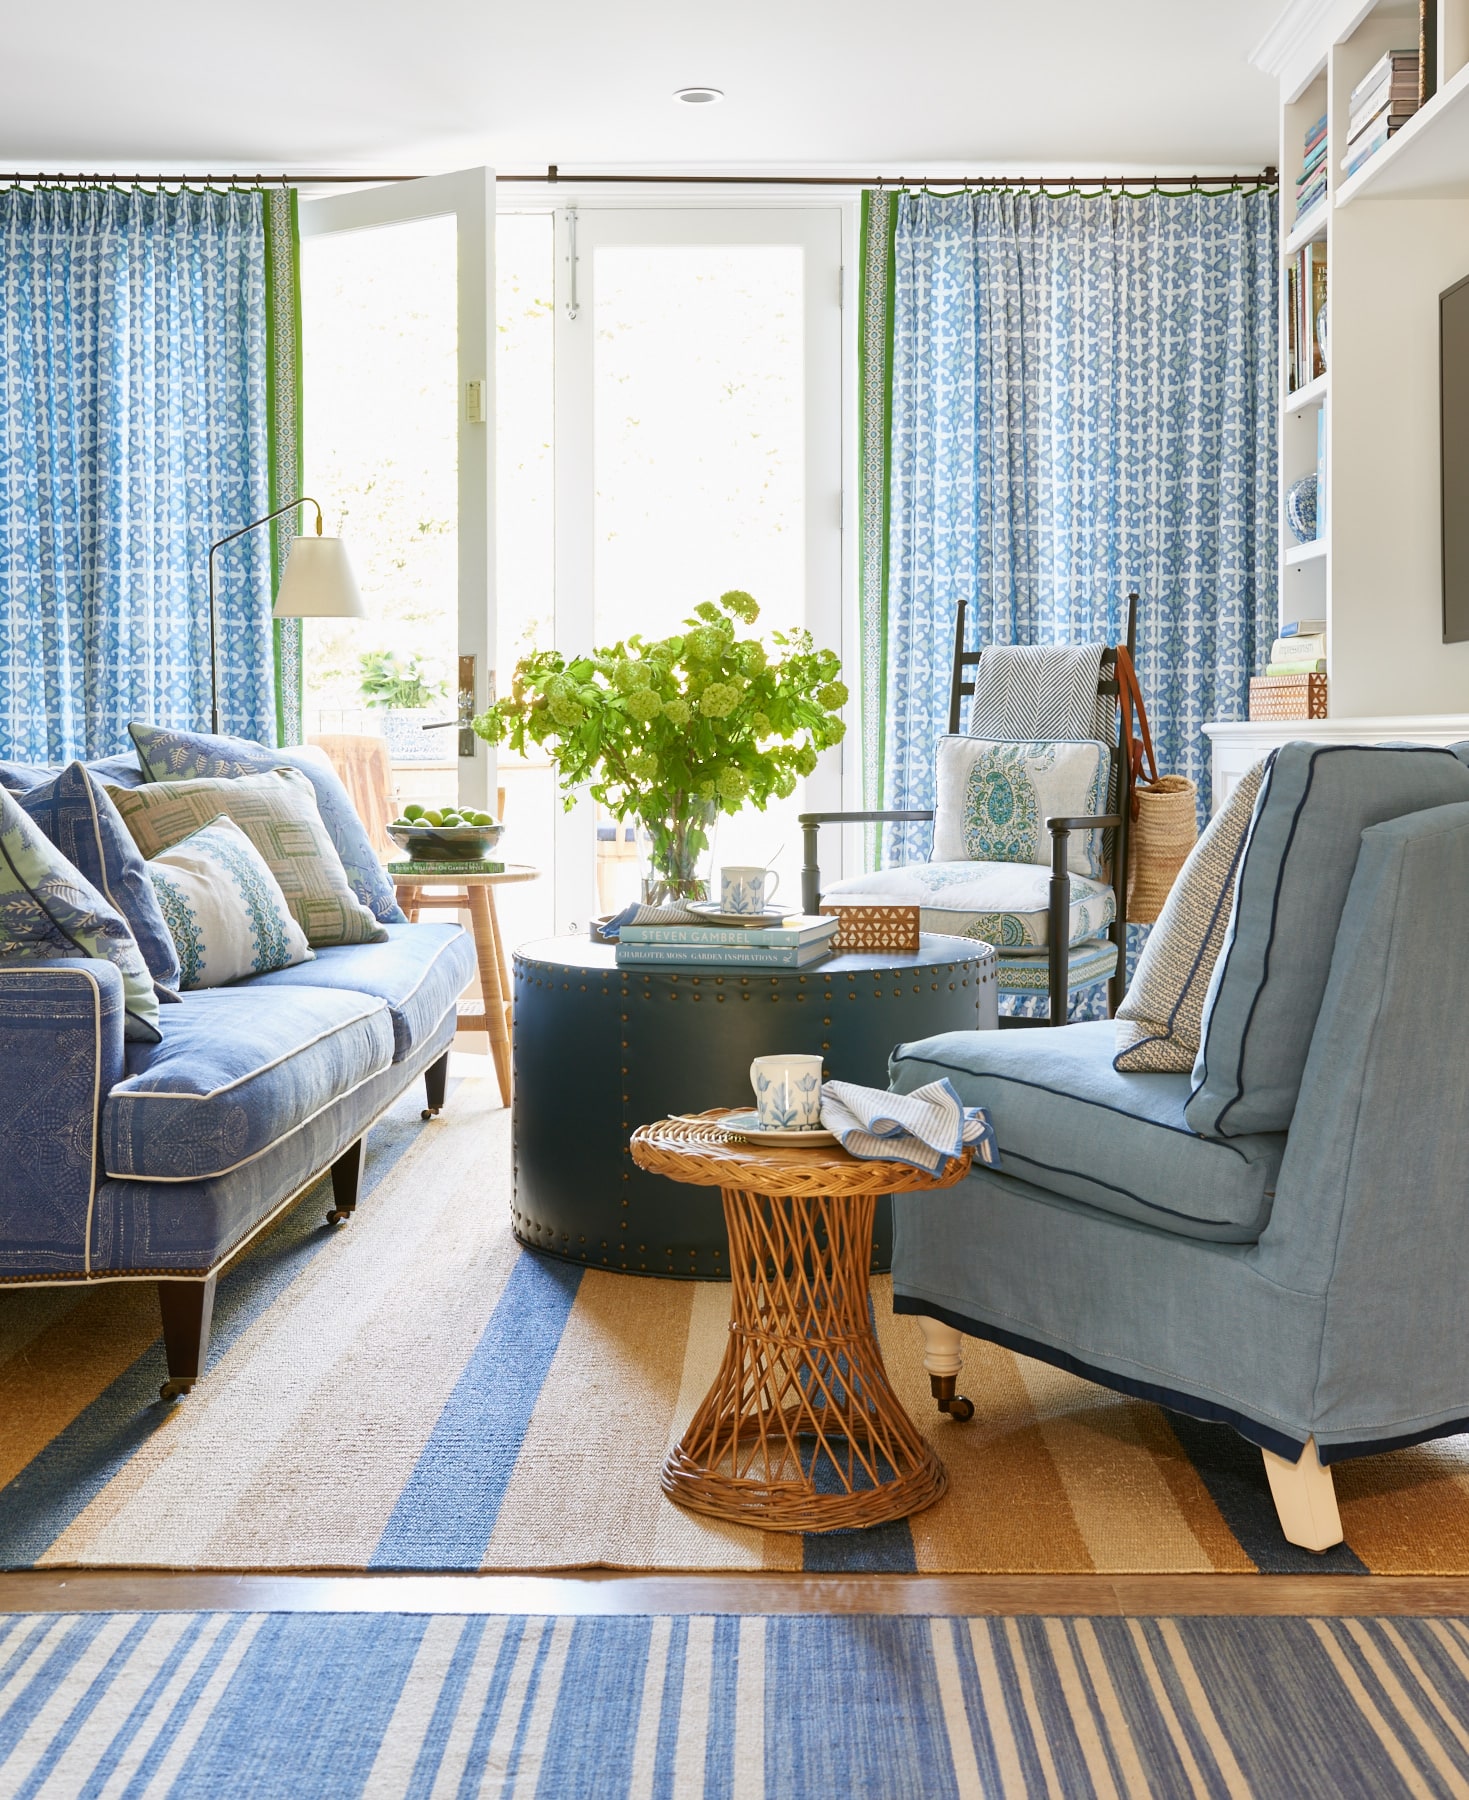 Sheer blue drapes on long iron rod with contrast edge and upholstered seating with contrast trim